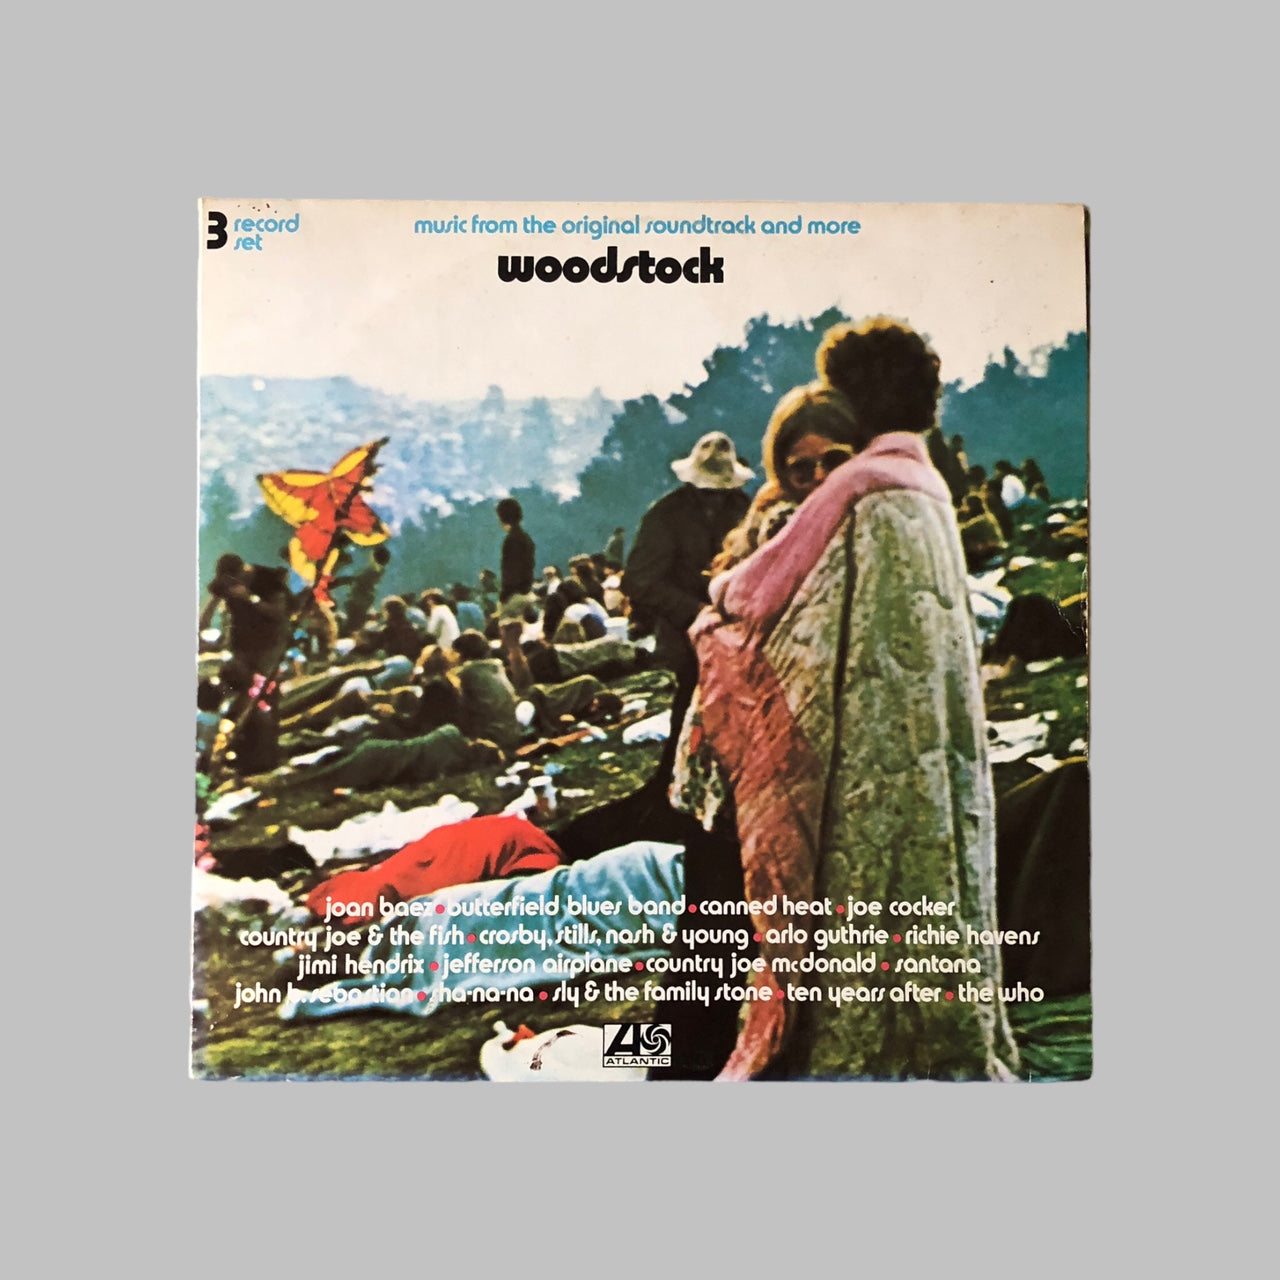 LP Vinyl - Woodstock - Music From The Original Soundtrack And More.